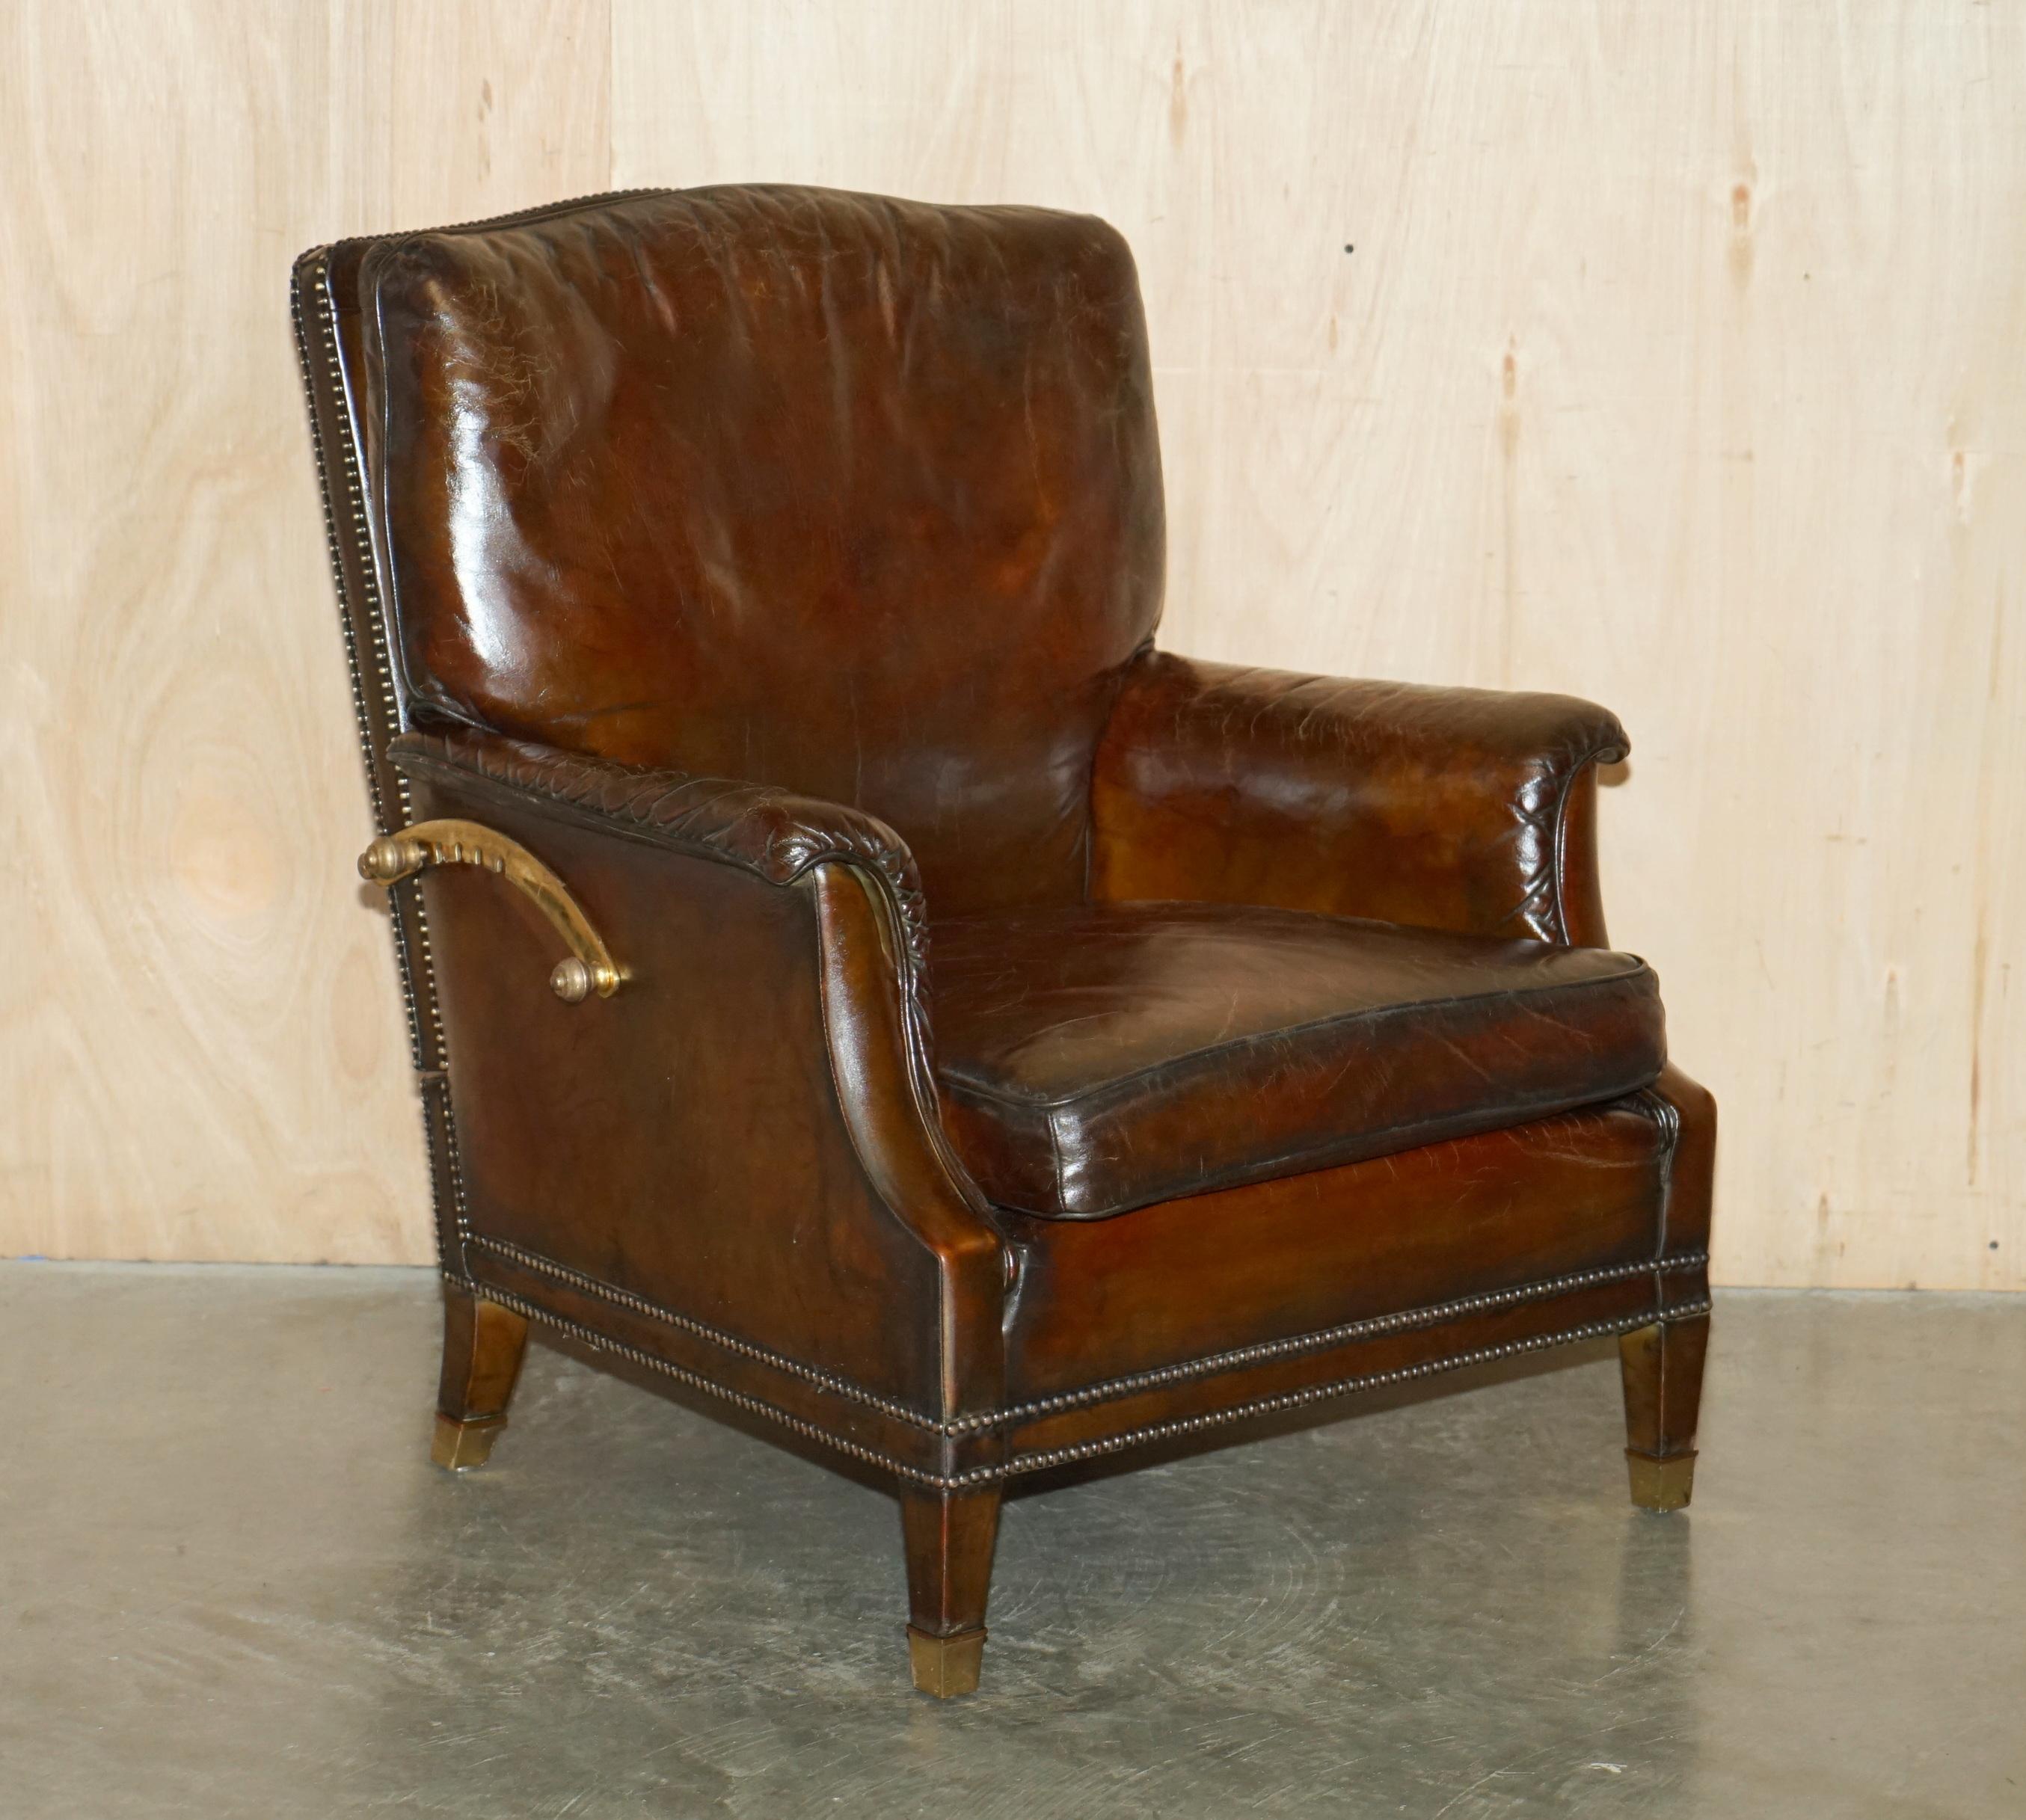 Royal House Antiques

Royal House Antiques is delighted to offer for sale this absolutely stunning, hand dyed deep Cigar brown leather reclining armchair with matching ottoman

Please note the delivery fee listed is just a guide, it covers within